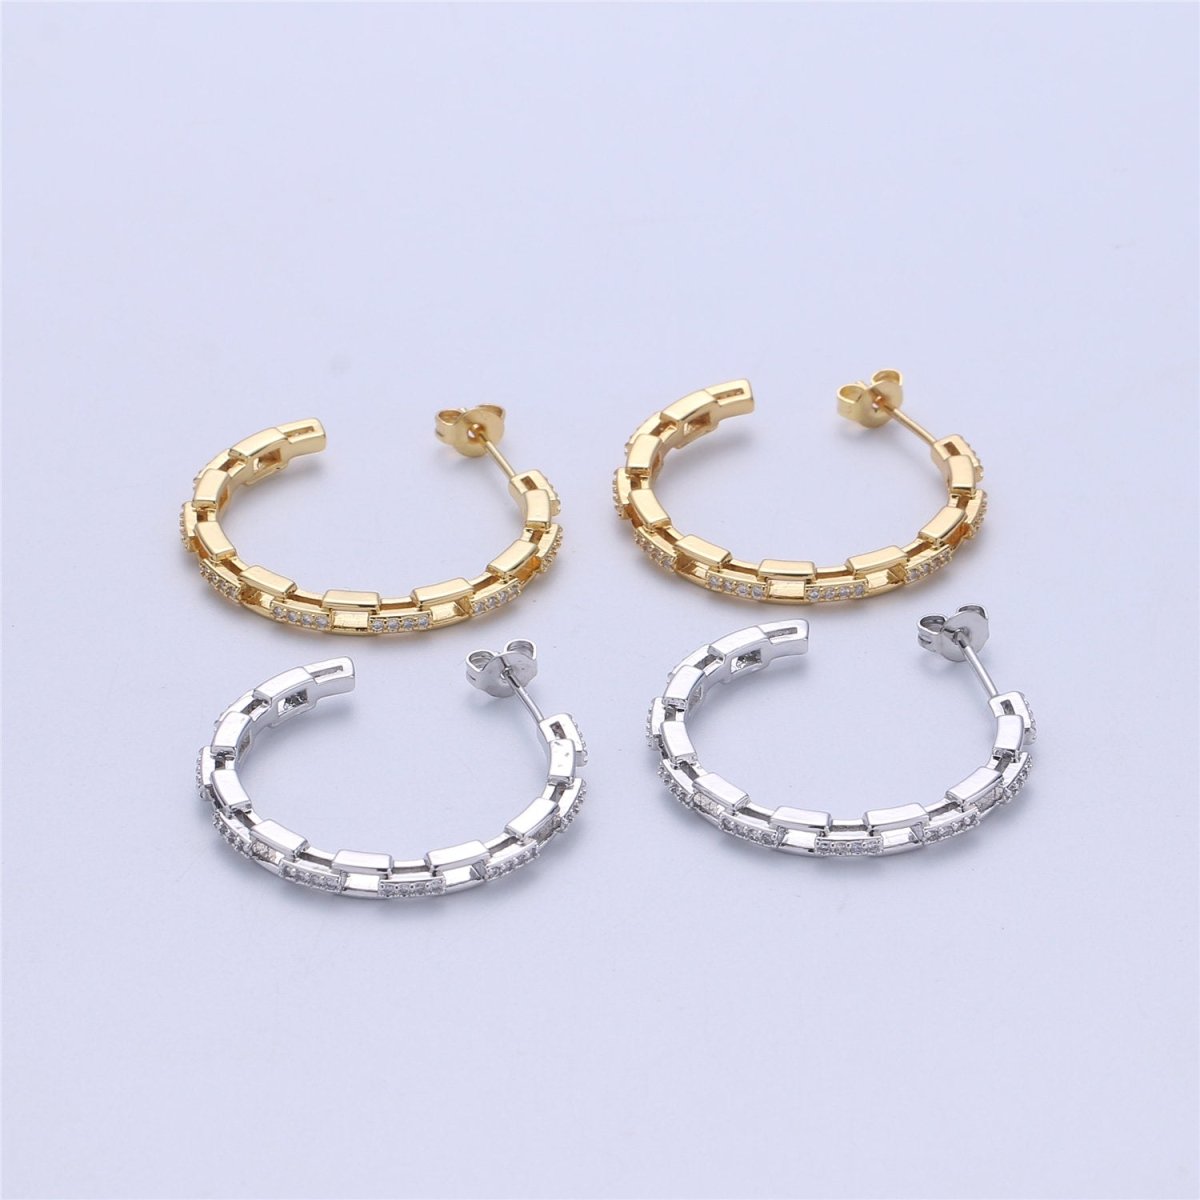 Dainty Gold Chain Earring- Curb Chain Earring - Micro Pave Thin Earring - Gold Filled Hoop Ring - Minimalist Jewelry - Silver Link Earring Q-537 Q-538 - DLUXCA